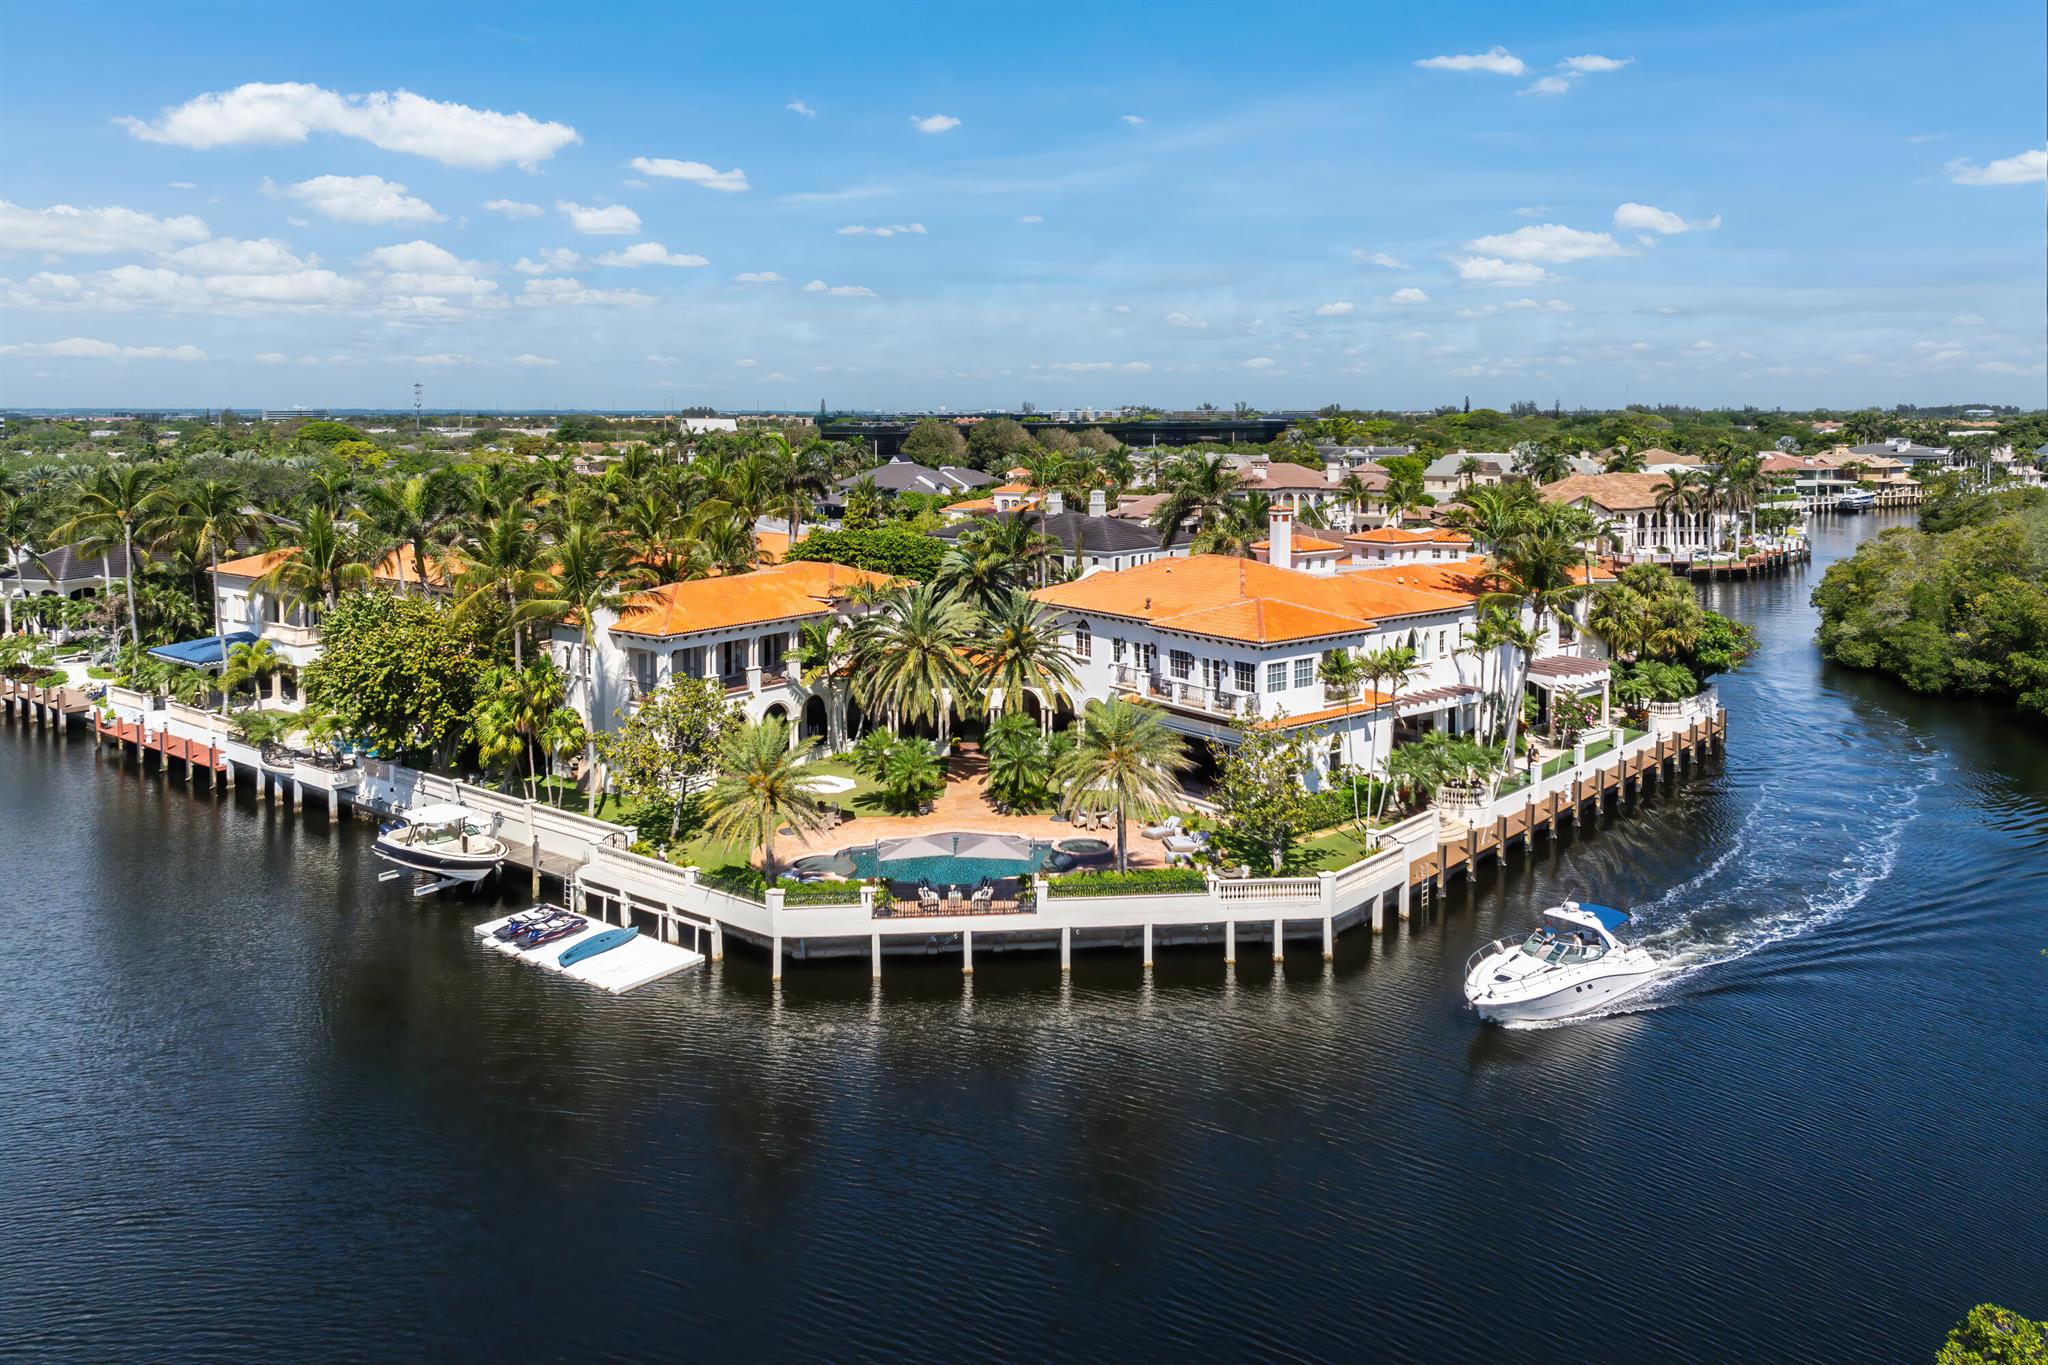 Totally updated, magnificent Mediterranean estate with 350 ft of water frontage elegantly situated on a double point lot in The Sanctuary, the most exclusive and highly sought-after luxury enclave on the Intracoastal in Boca Raton. The sprawling estate is a yachtsman dream with two deep water docks-one approx. 150' ft long,  frameless glass railings for visibility, multiple covered loggia, one with outdoor entertaining area, gas fireplace, and bocce court, impeccably manicured landscaping, and heated swimming pool. The interior of the home boasts the most exquisite finishes with fully-pocketing +12 ft sliding impact doors, high ceilings, onyx floors in bathrooms, Carrara marble kitchen counter-tops, hardwood floors, custom cabinetry. The perfect example of a wonderfully executed 3 half baths, a Skibo room with incredible wood detail, stained glass windows, wine cellar and full bar, two laundry rooms (one upstairs, one down), a captain's suite with fast access to the dock, a plentiful 5 car garage (3 doors, 2 tandem spaces), expansive master suite, library/office space, sauna. Additional features include: A bedroom has been transformed into a theater room, 2/2 Guest house with full caterer's/chef's kitchen, outdoor kitchen with top-of-the-line appliances, beautiful breezeway, automatic over-sized retractable awnings, multiple balconies facing the intracoastal, pecky cypress ceiling details, and more. The perfect example of a wonderfully executed transition between old world charm with contemporary finishes.

"The Sanctuary is a guard-gated yachting enclave featuring a 20-slip marina, 2 Har-Tru tennis courts, a multifunctional sport court, playground/park, and 27-¦-acre bird/wildlife preserve - all in the utmost seclusion with private land and water uniformed security roving patrols and concierge services.  It is listed in Forbes Top Ten Most Exclusive and Expensive Gated Communities in the United States."